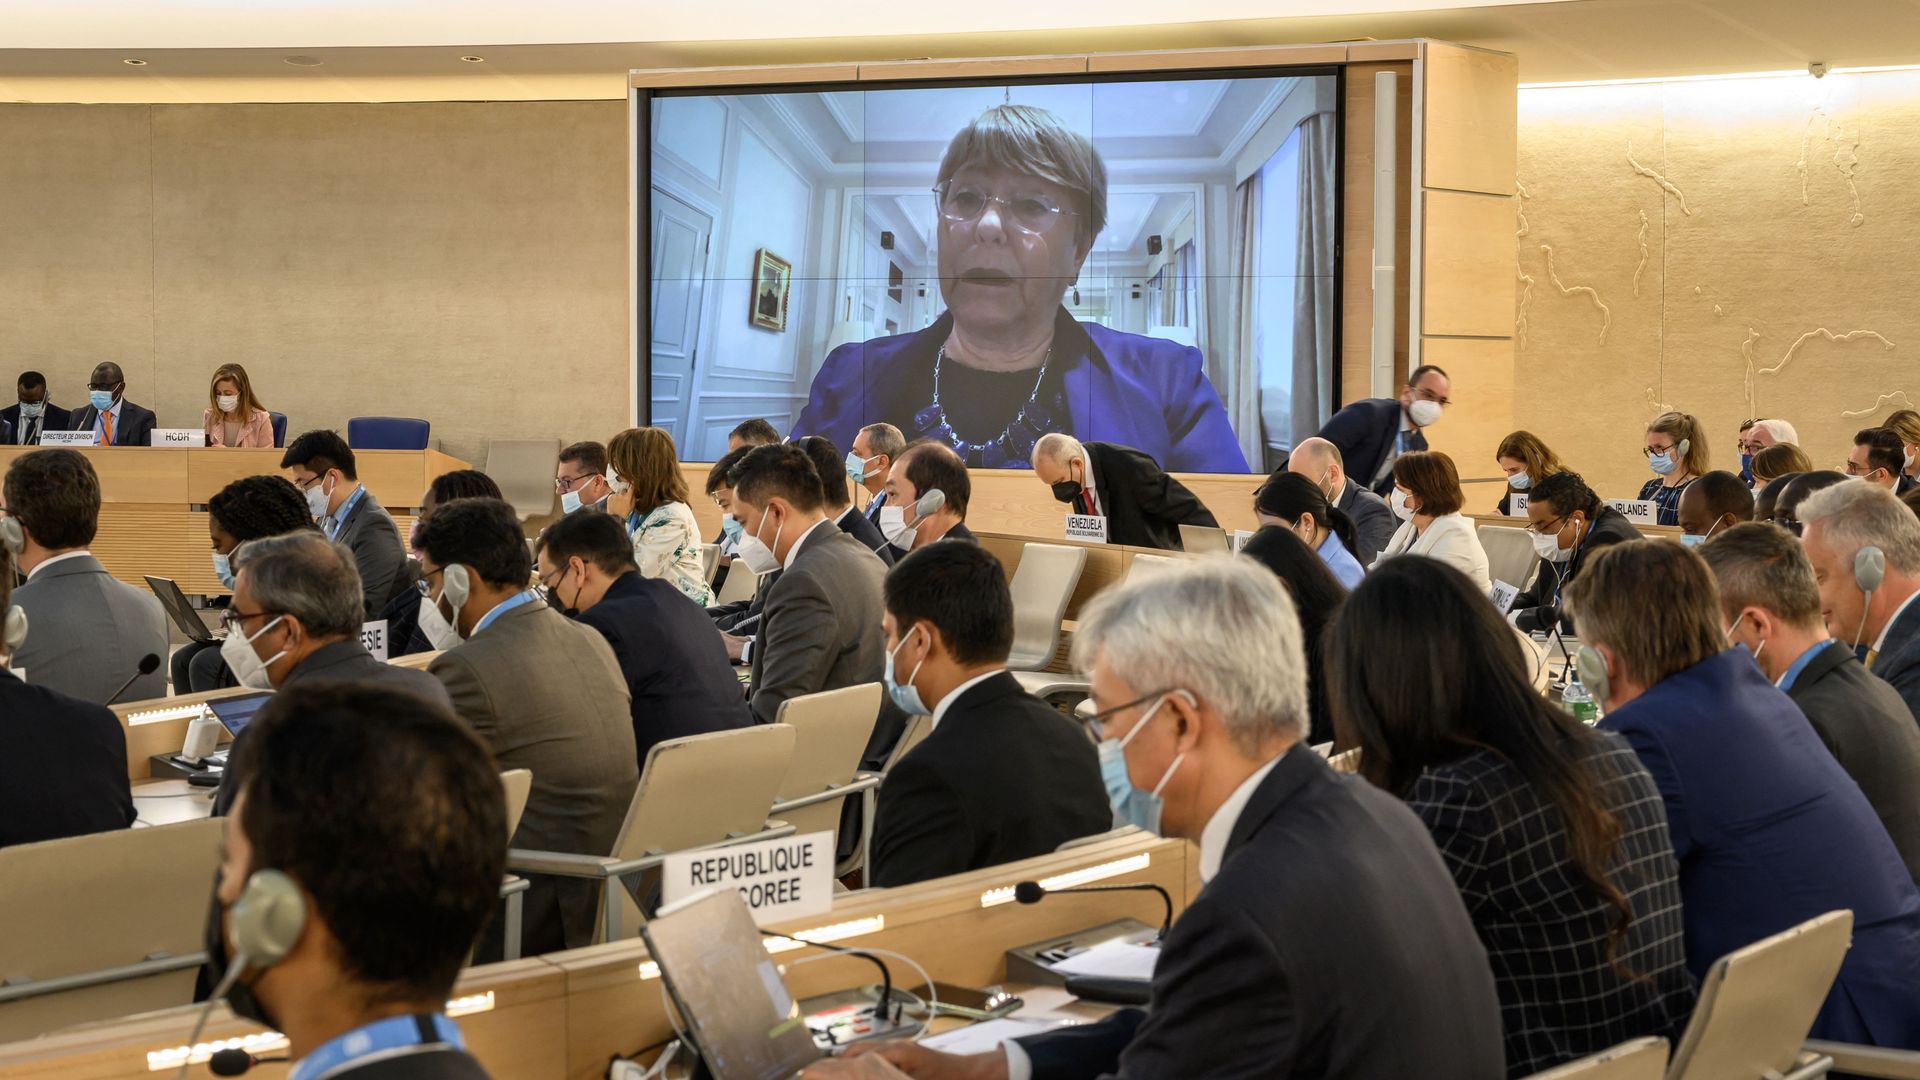 United Nations High Commissioner for Human Rights Michelle Bachelet is seen on a giant screen delivering a remote speech 